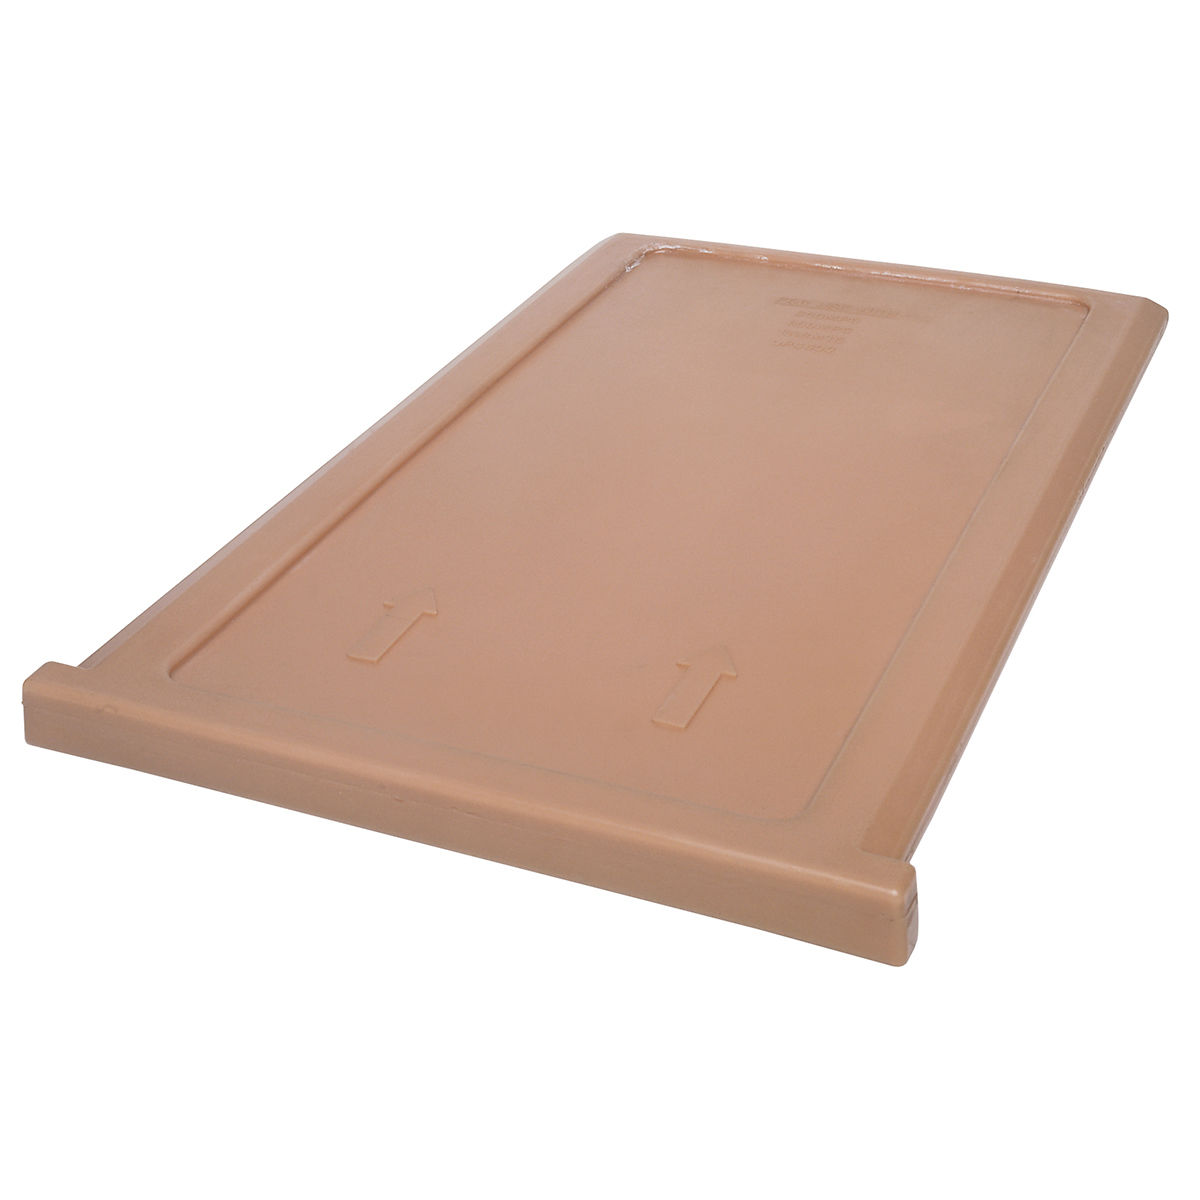 Cambro Thermobarriers  - 300DIV157, 400DIV180, 1200DIV131 & 1600DIV401 